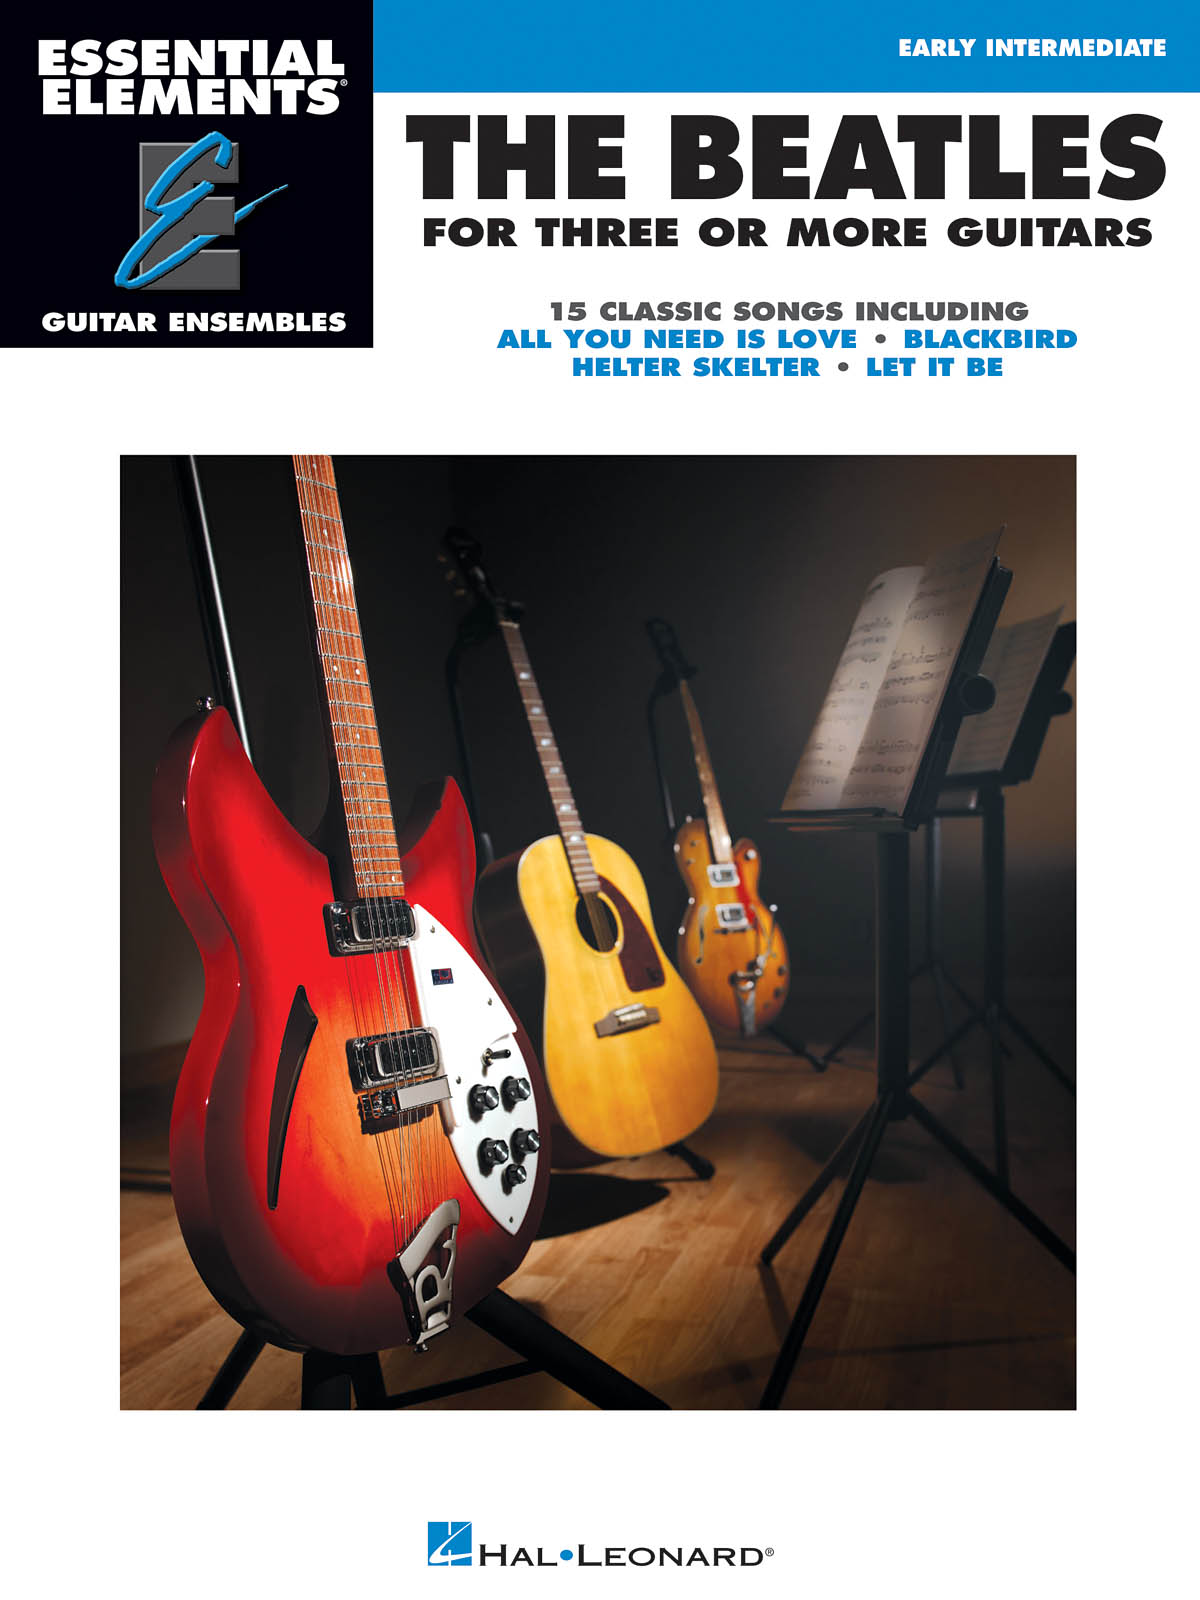 Essential Elements Guitar Ens - The Beatles  - 15 Classic Songs Arranged for Three or More Guitarists